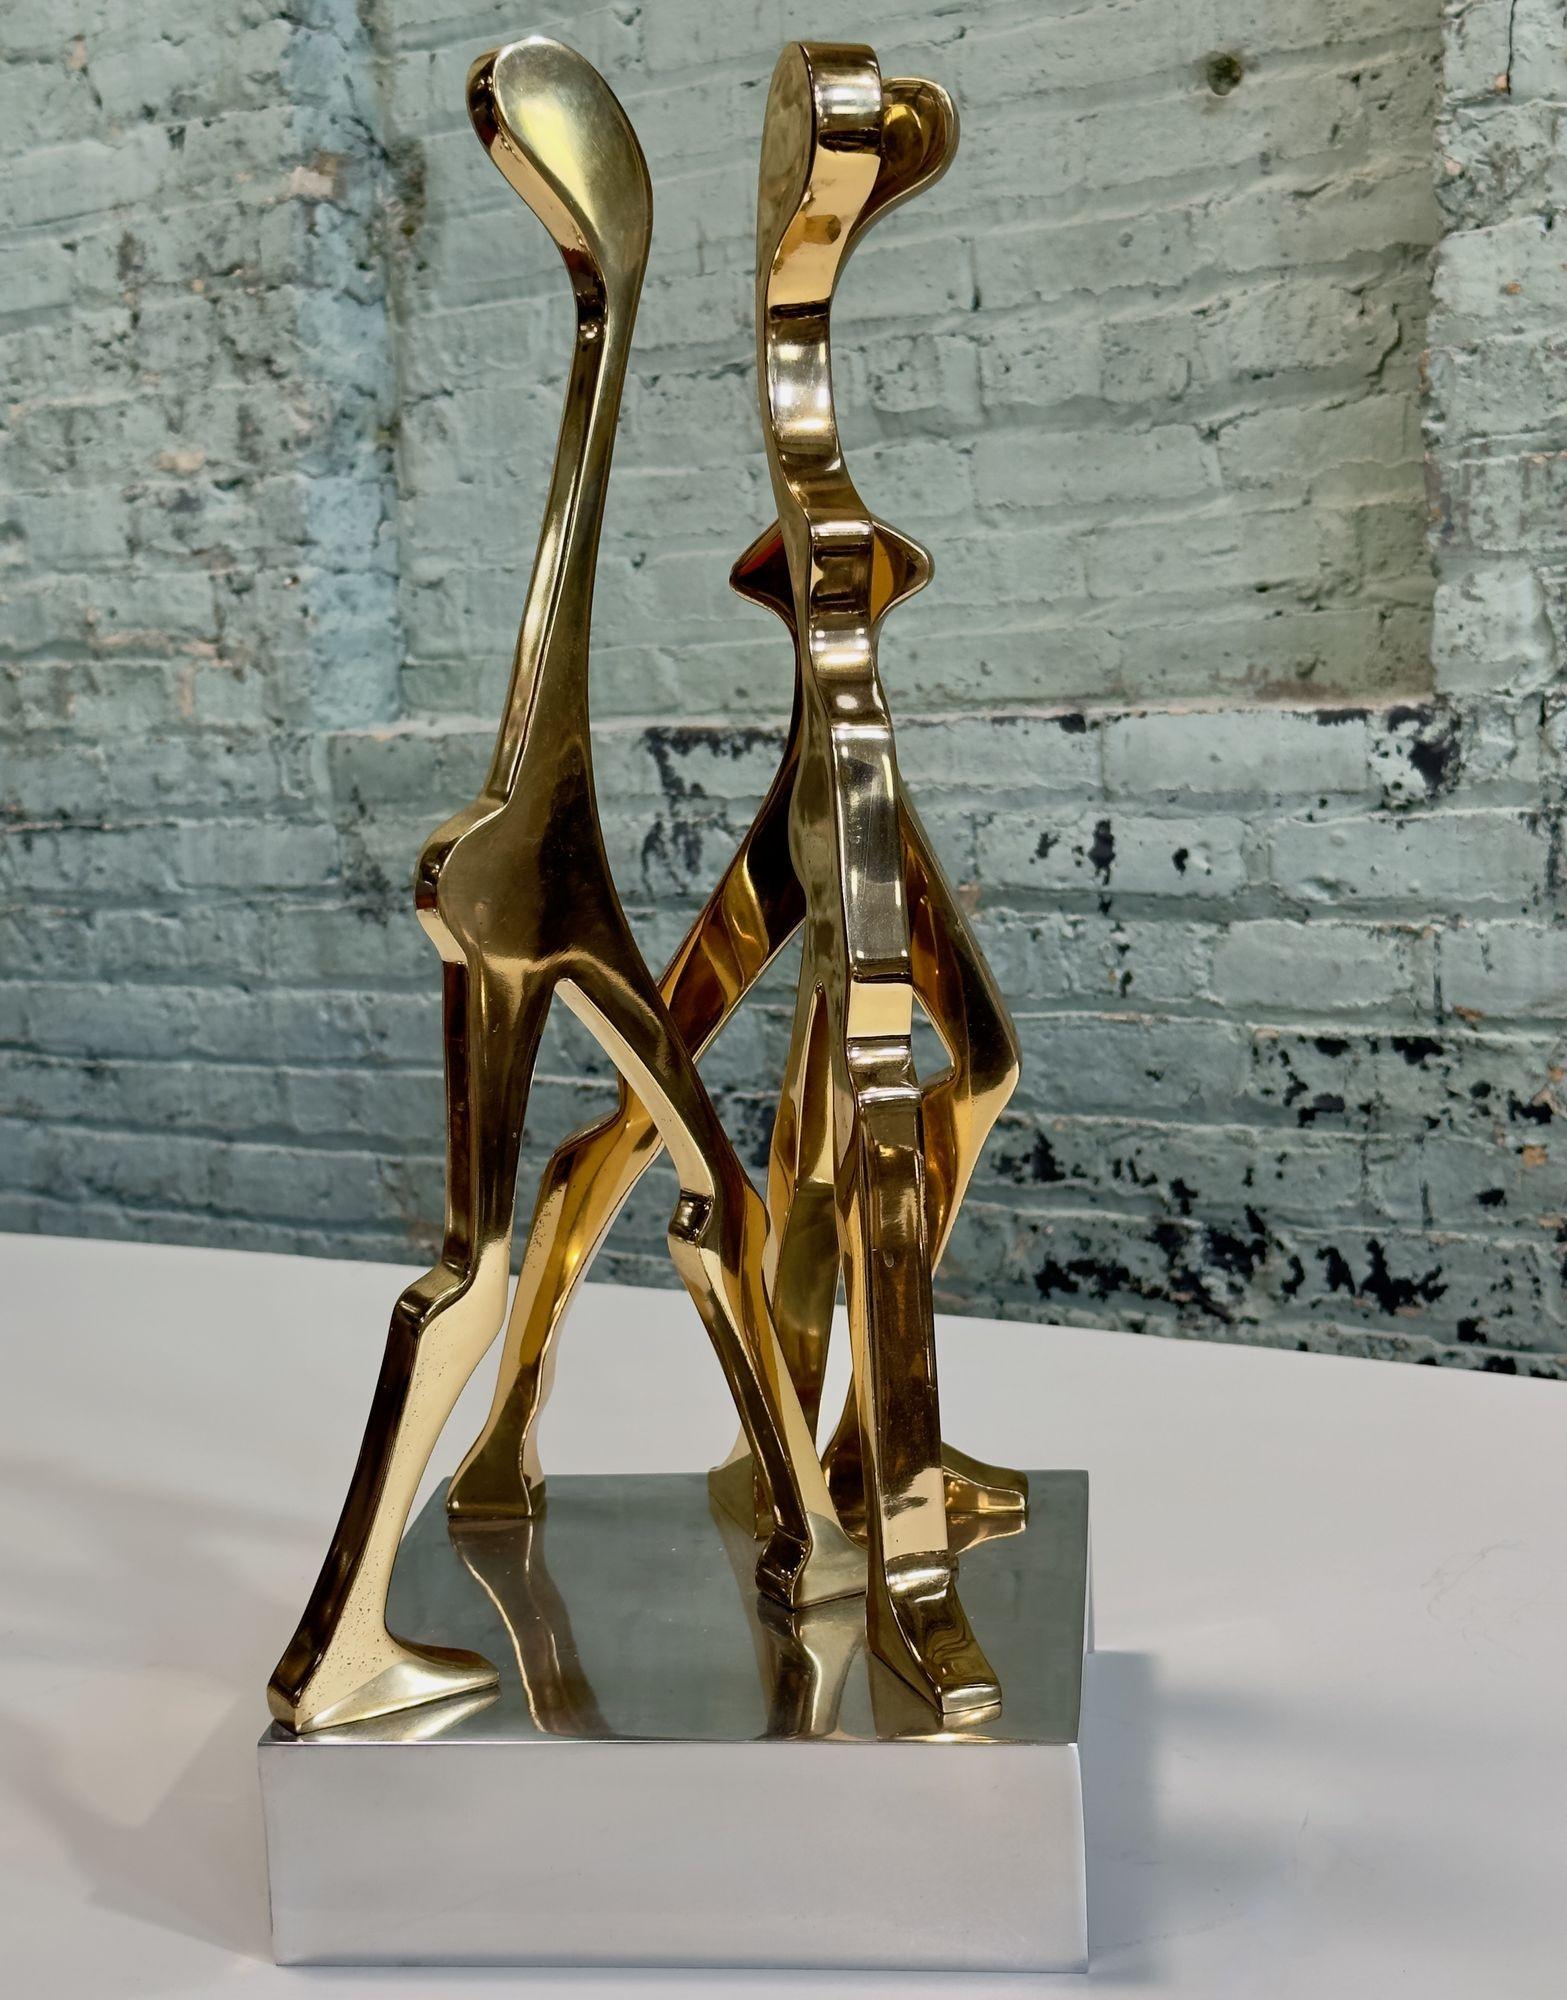 Large Brass and Polished Aluminum Figurative Sculpture attributed to Jean Arp, 1970's
Polished aluminum base with clear lacquer. Brass has some patina.